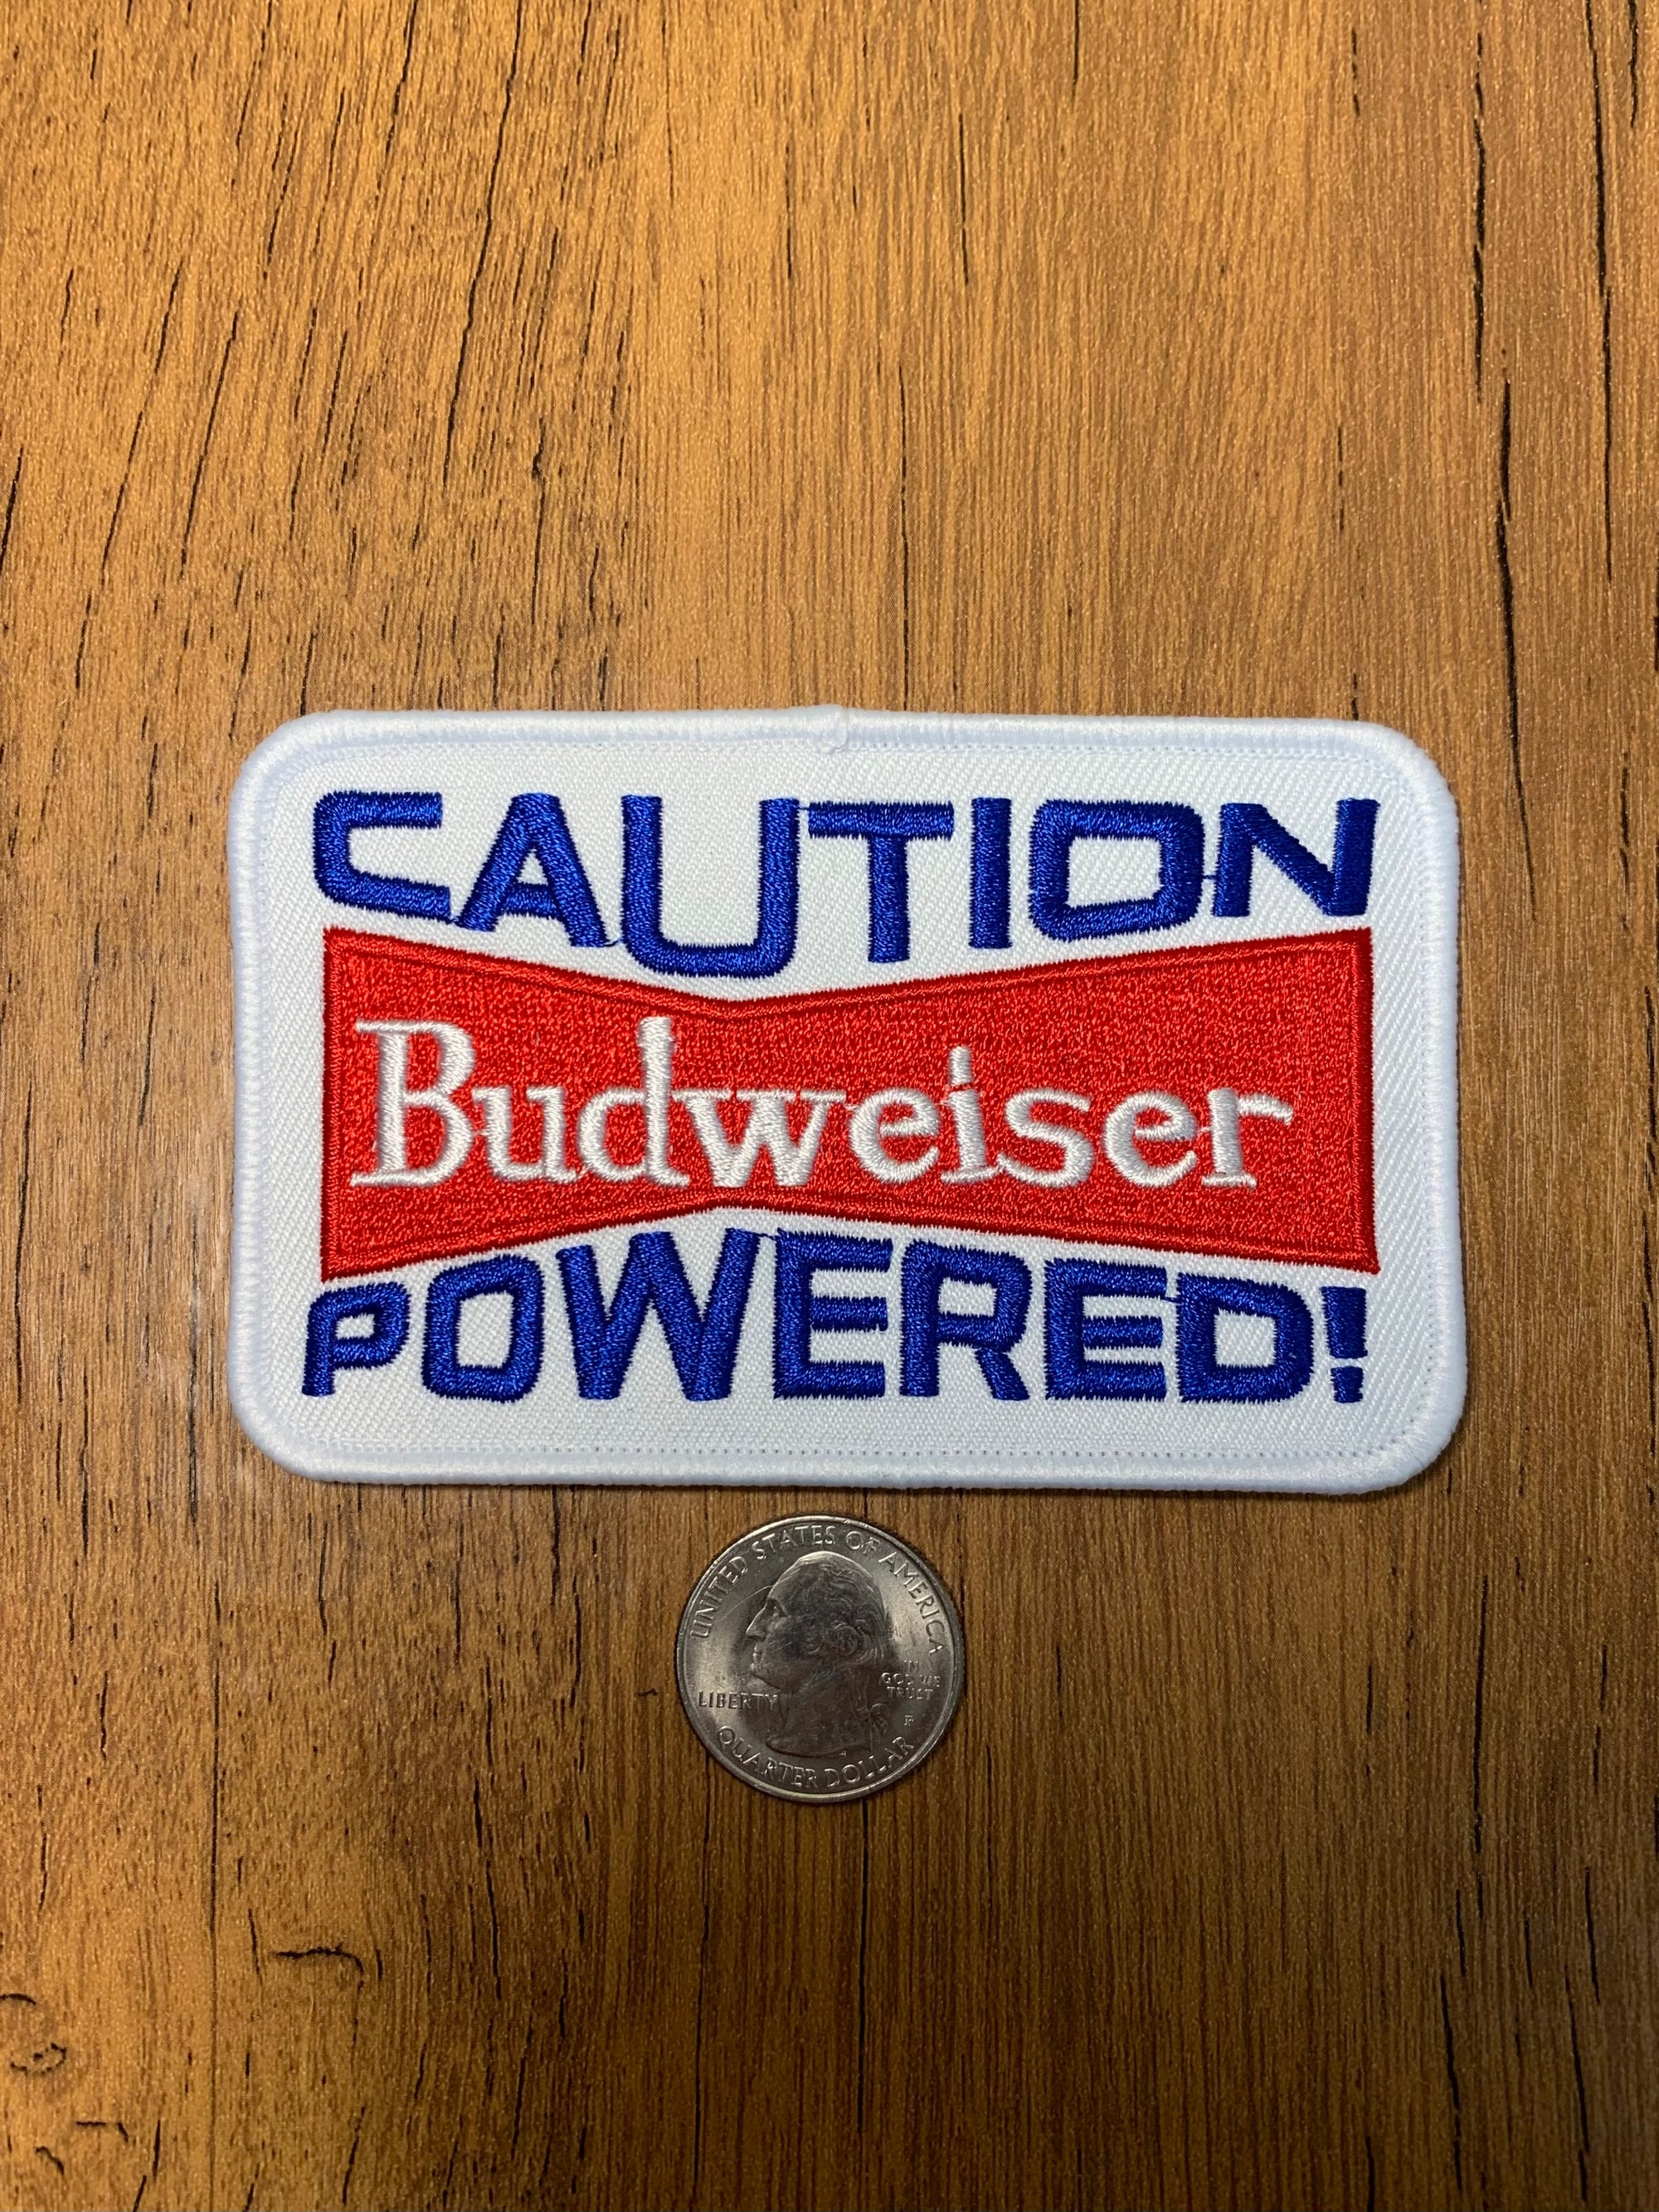 Caution Budweiser Powered, Beer, Alcohol, Drinks